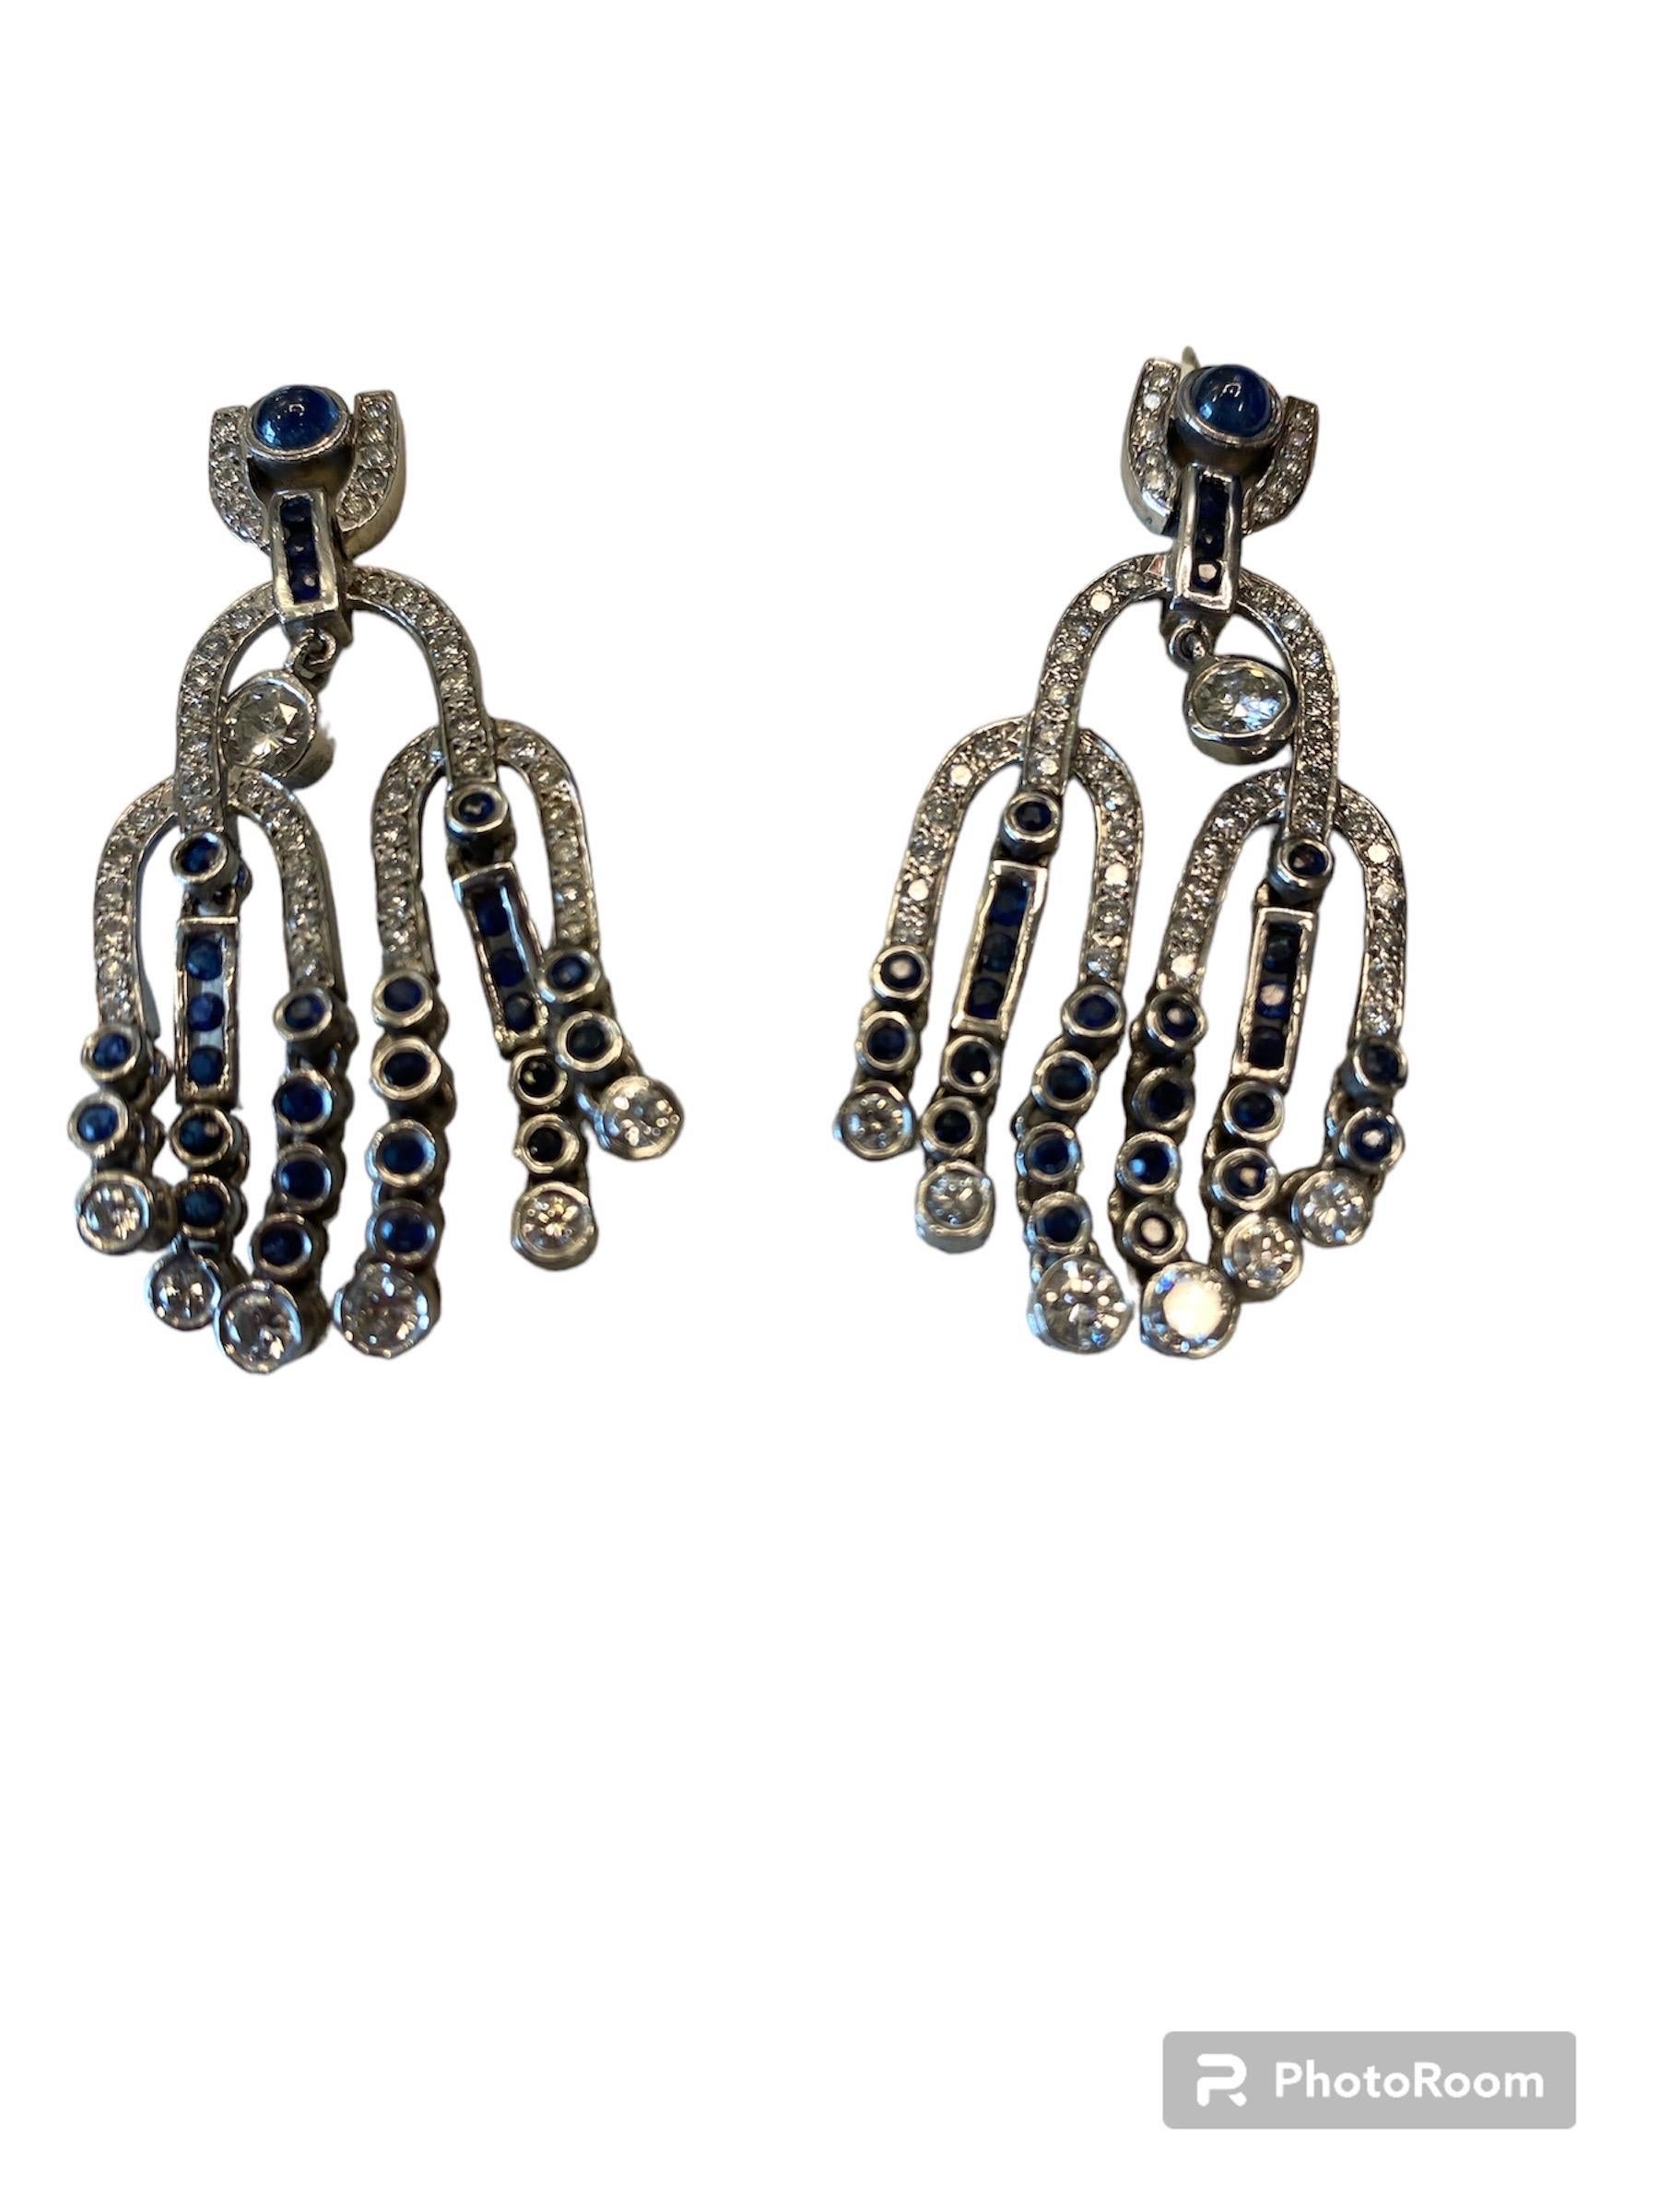 Brilliant Cut 14K White Gold Earrings With Sapphires  For Sale